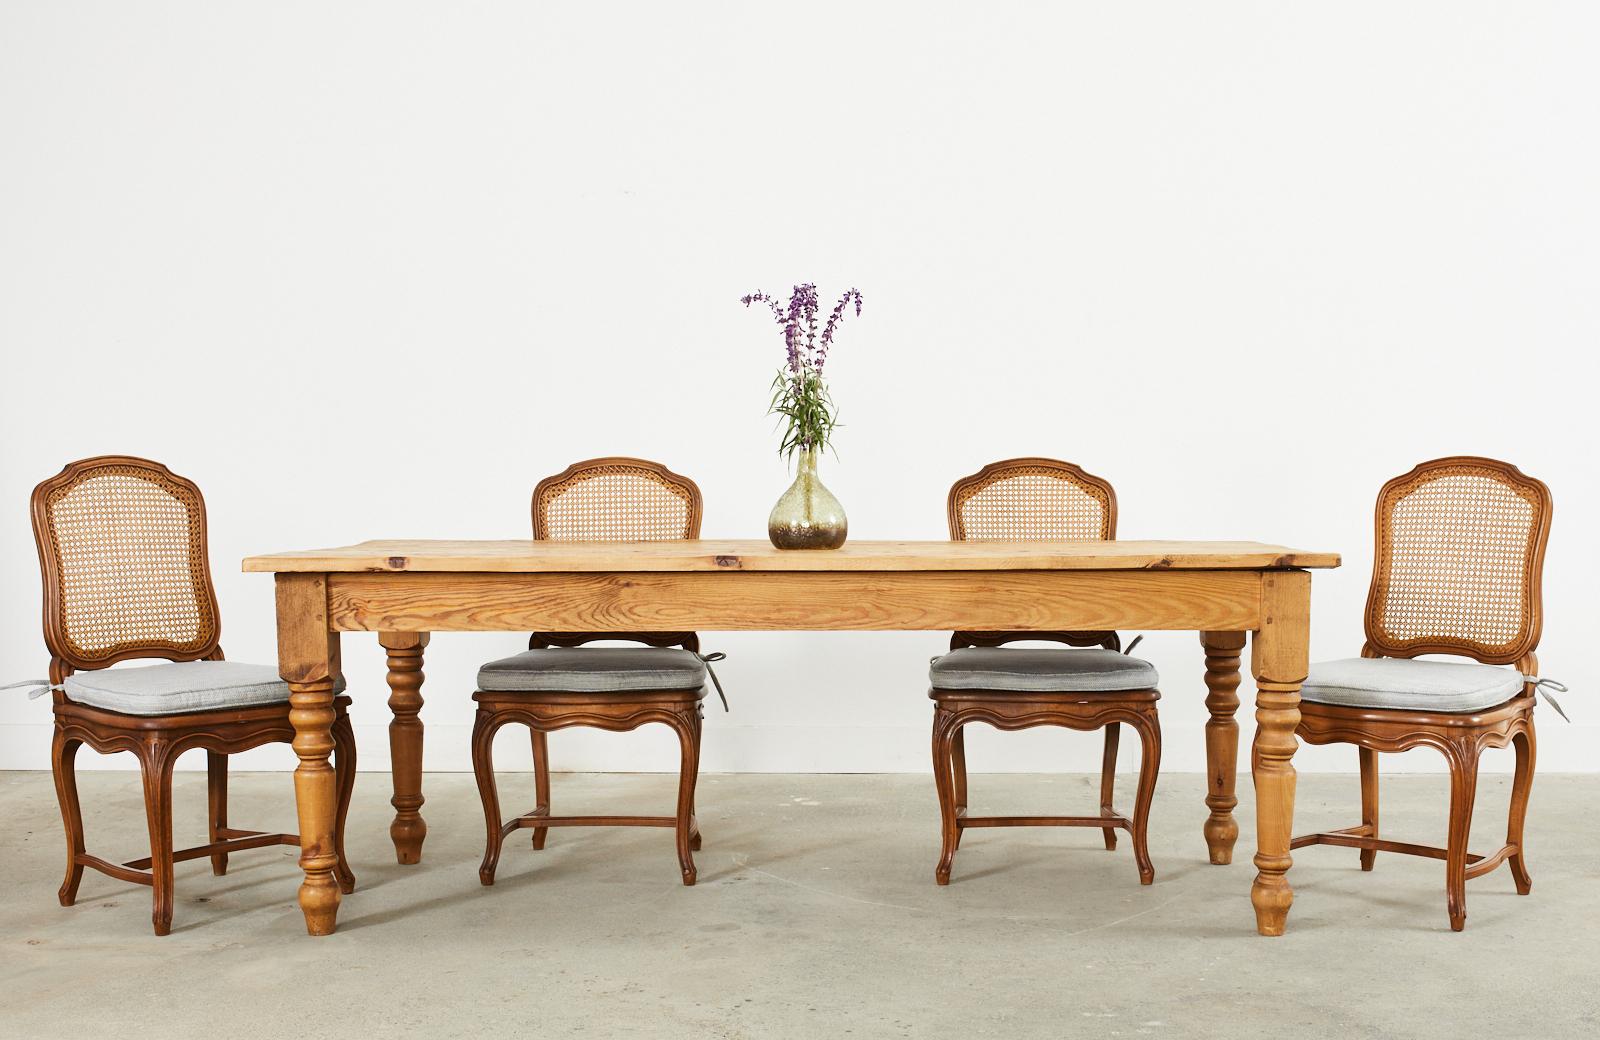 Handsome pine farmhouse dining table or harvest table made in the country English style. The top is crafted from 1 inch thick reclaimed barn wood with a beautifully aged patina and natural finish to showcase the weathered woodgrains and knots in the